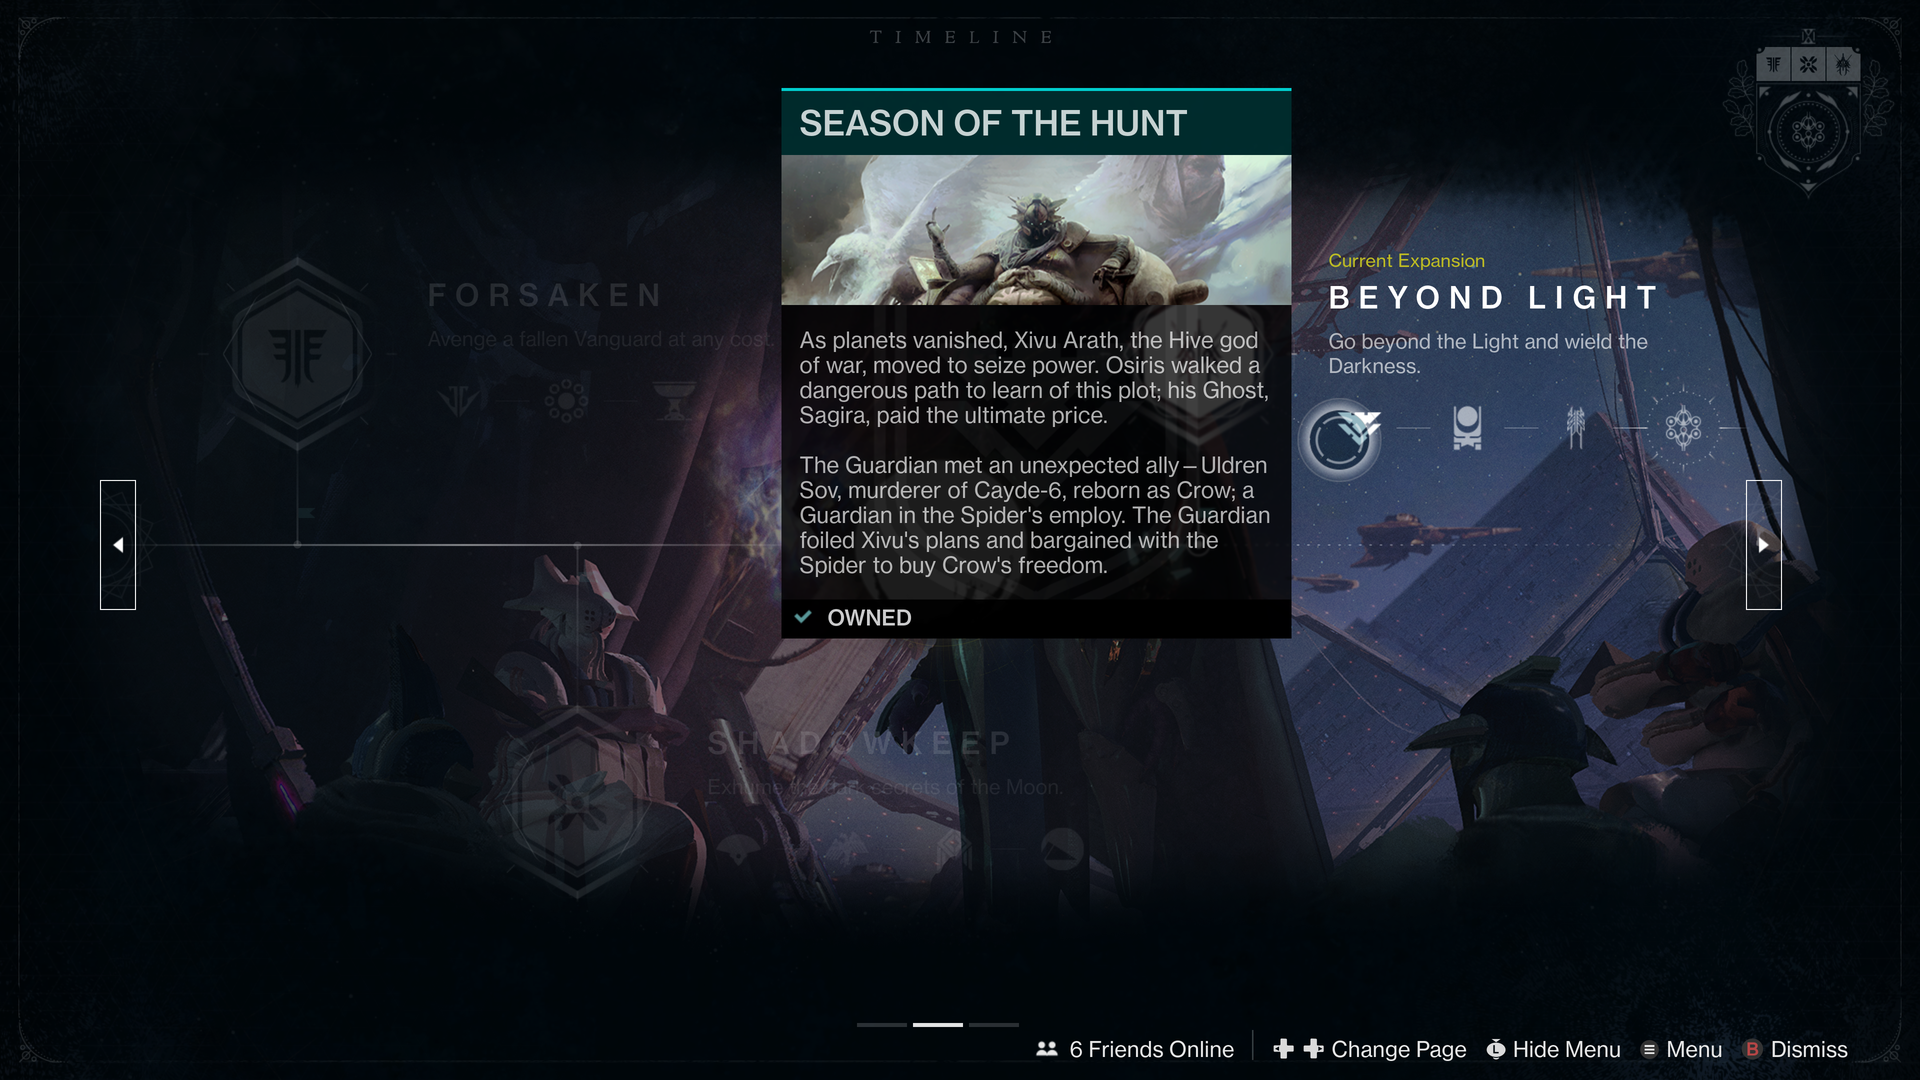 Video game screenshot showing an event timeline and descriptions of what happened in the game for each node